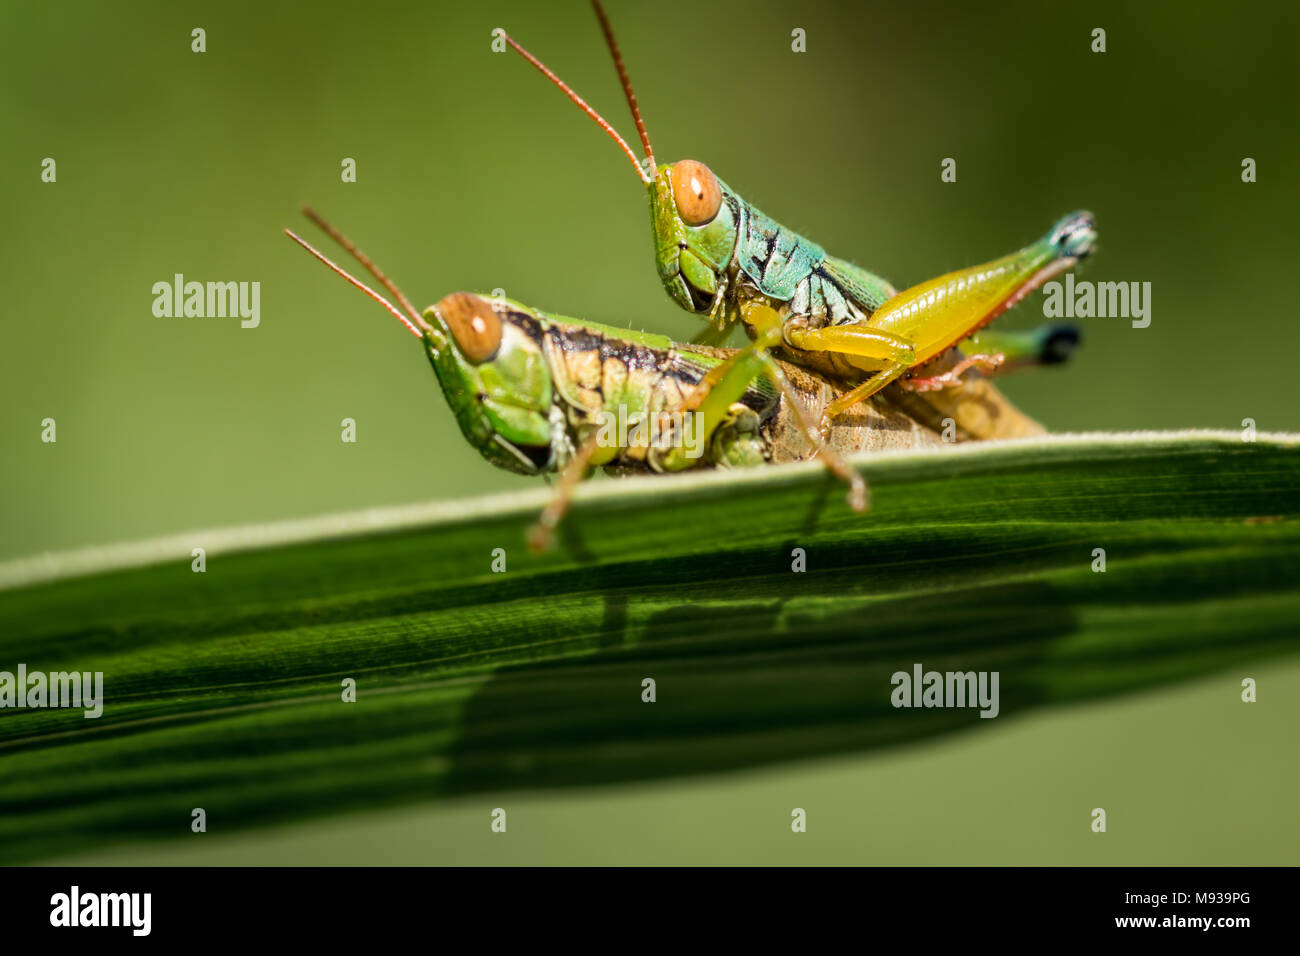 Macro photo of Caryanda spuria mating grasshoppers in the act of copulation. Caryanda spuria is known as short-horned grasshopper. A plant pest Stock Photo